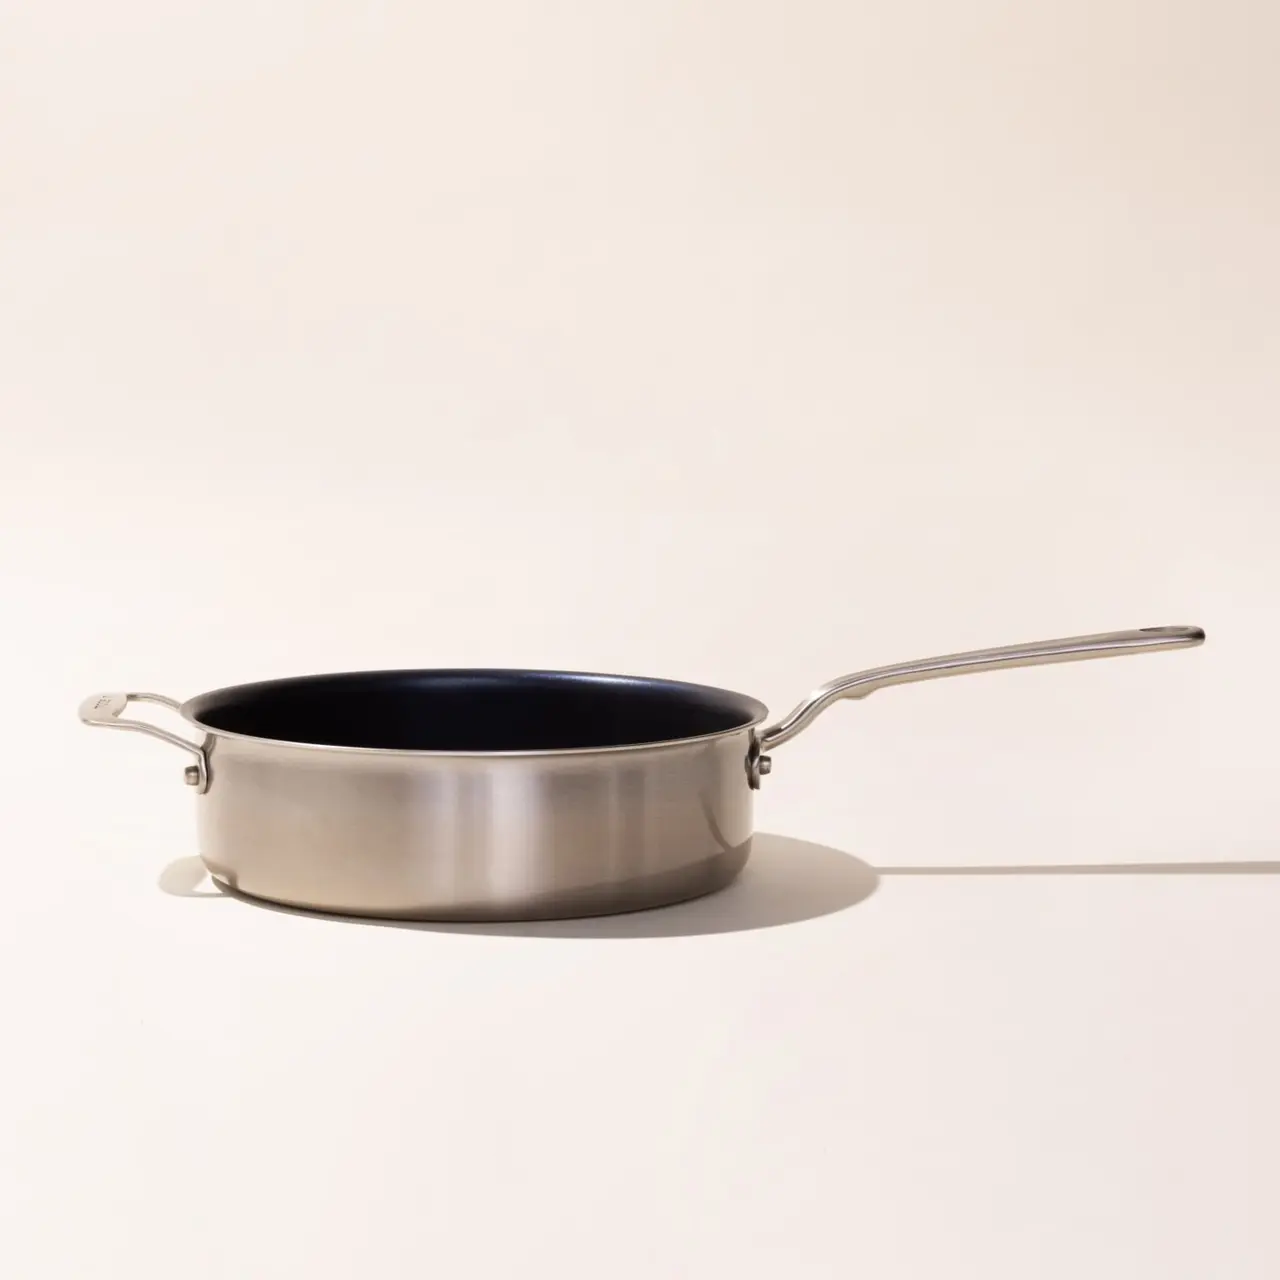 A stainless steel frying pan with a long handle is positioned on a plain surface with a neutral background.